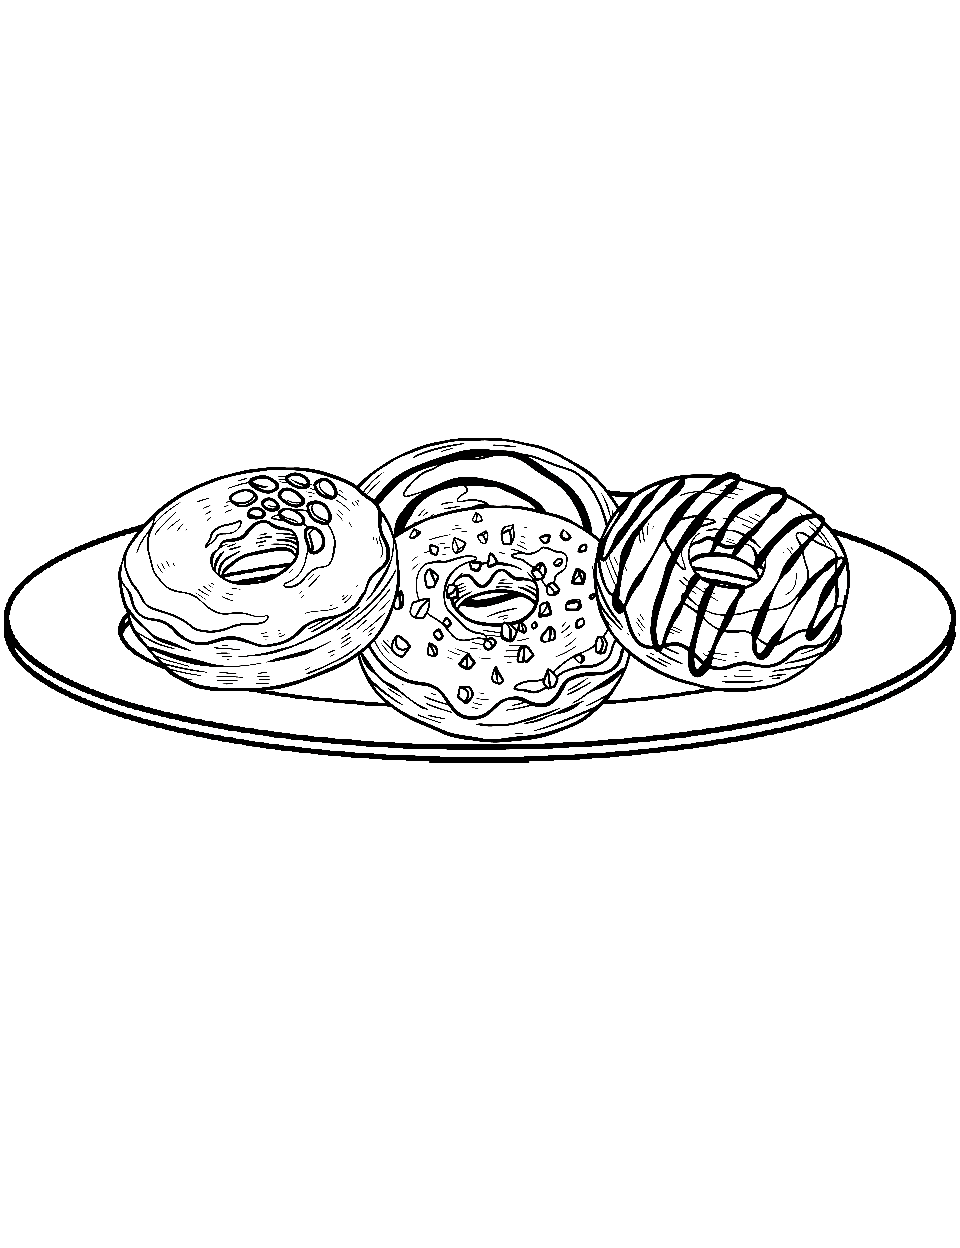 Donuts on a Plate Donut Coloring Page - Several types of frosted and glazed donuts, some with chocolate drizzle, neatly arranged on a plate.